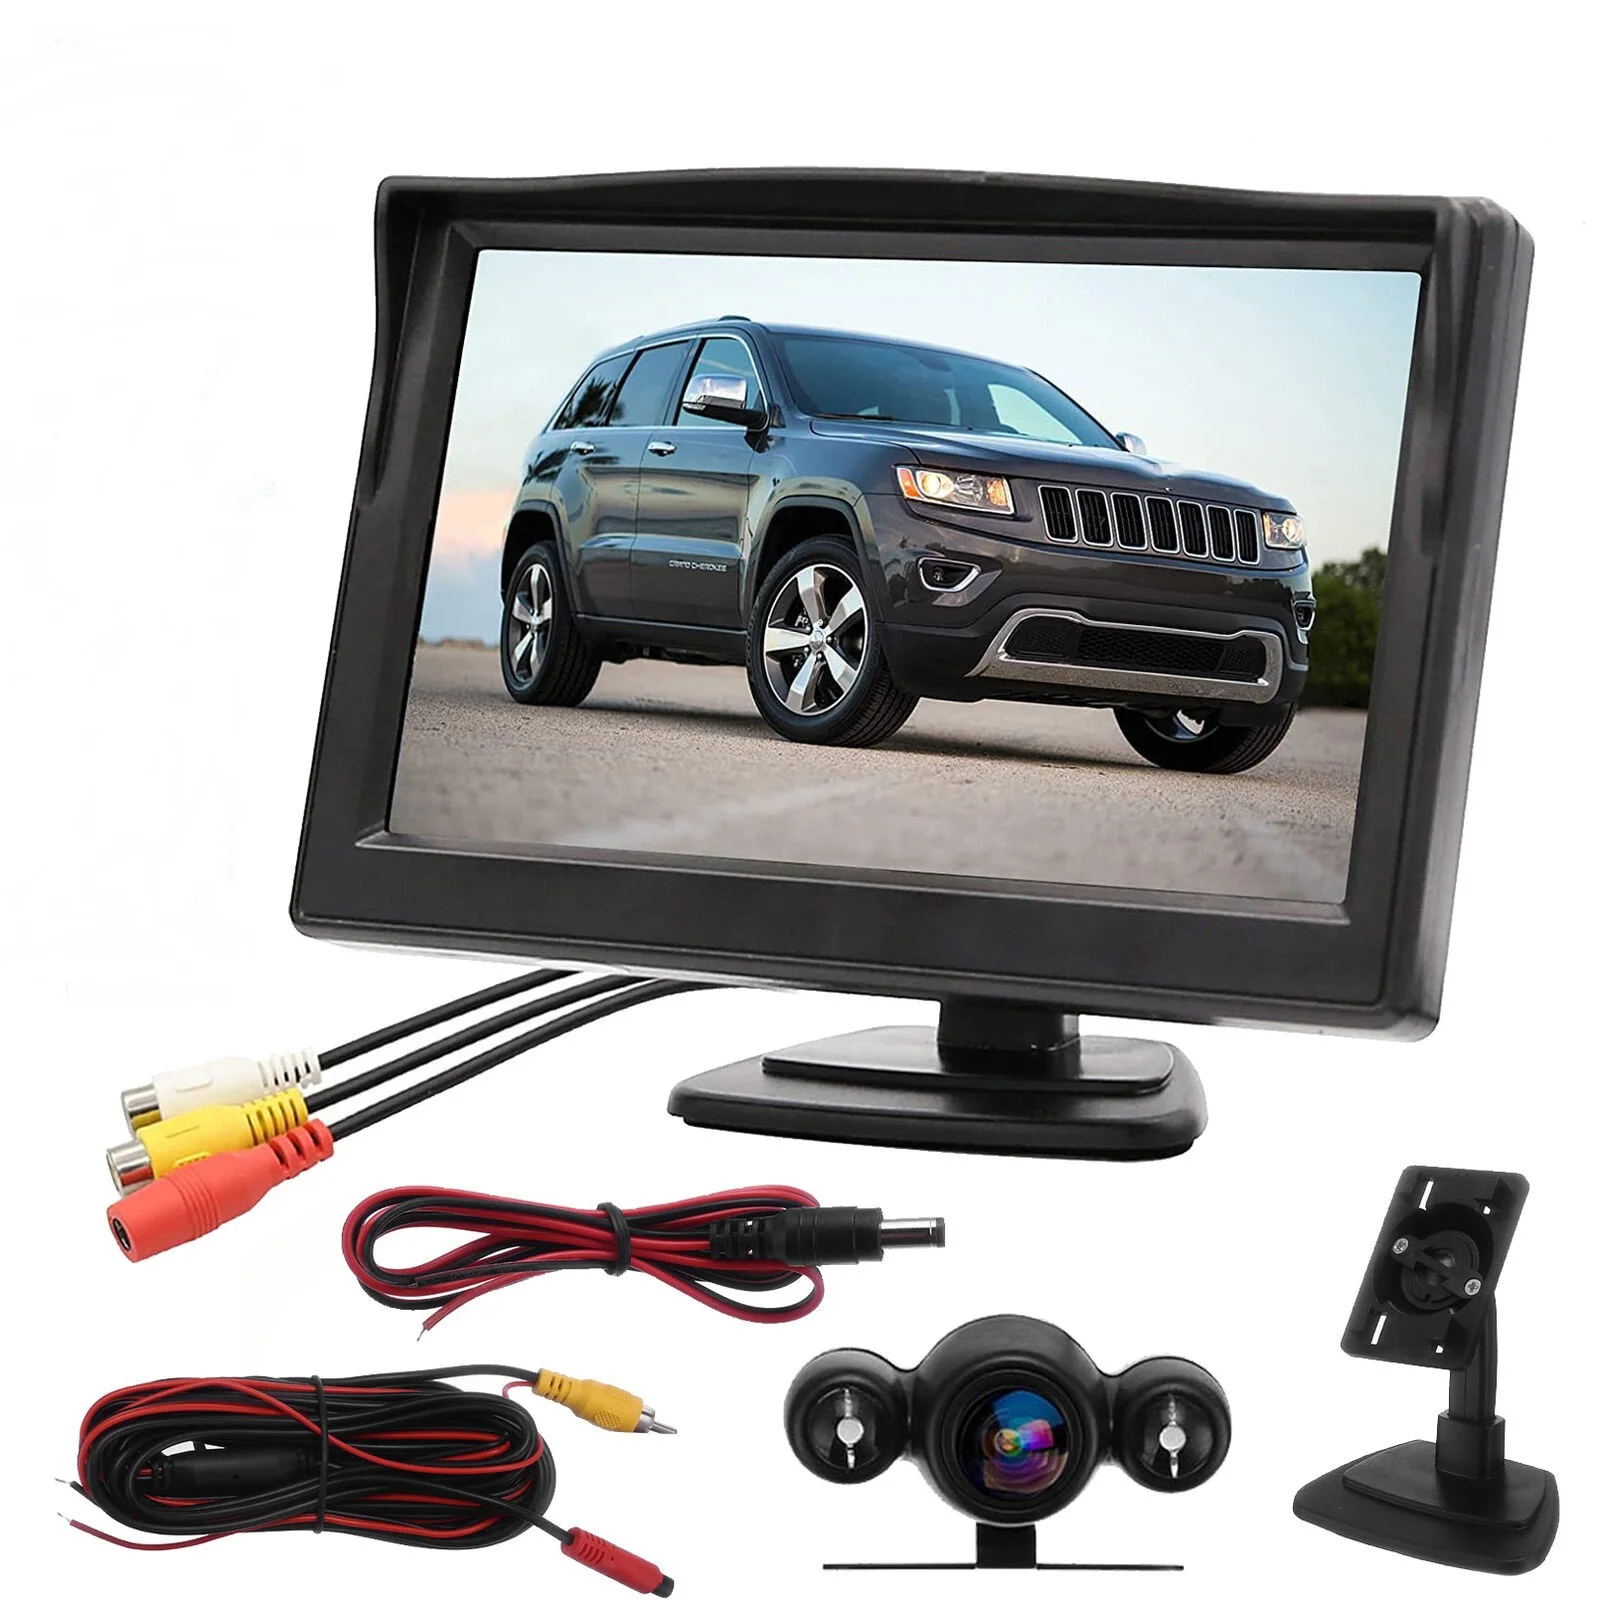 

Car Backup Camera With 5 Inch Monitor Kit Waterproof Night Vision Rear View Camera Wired Back Up Camera System For Truck SUV